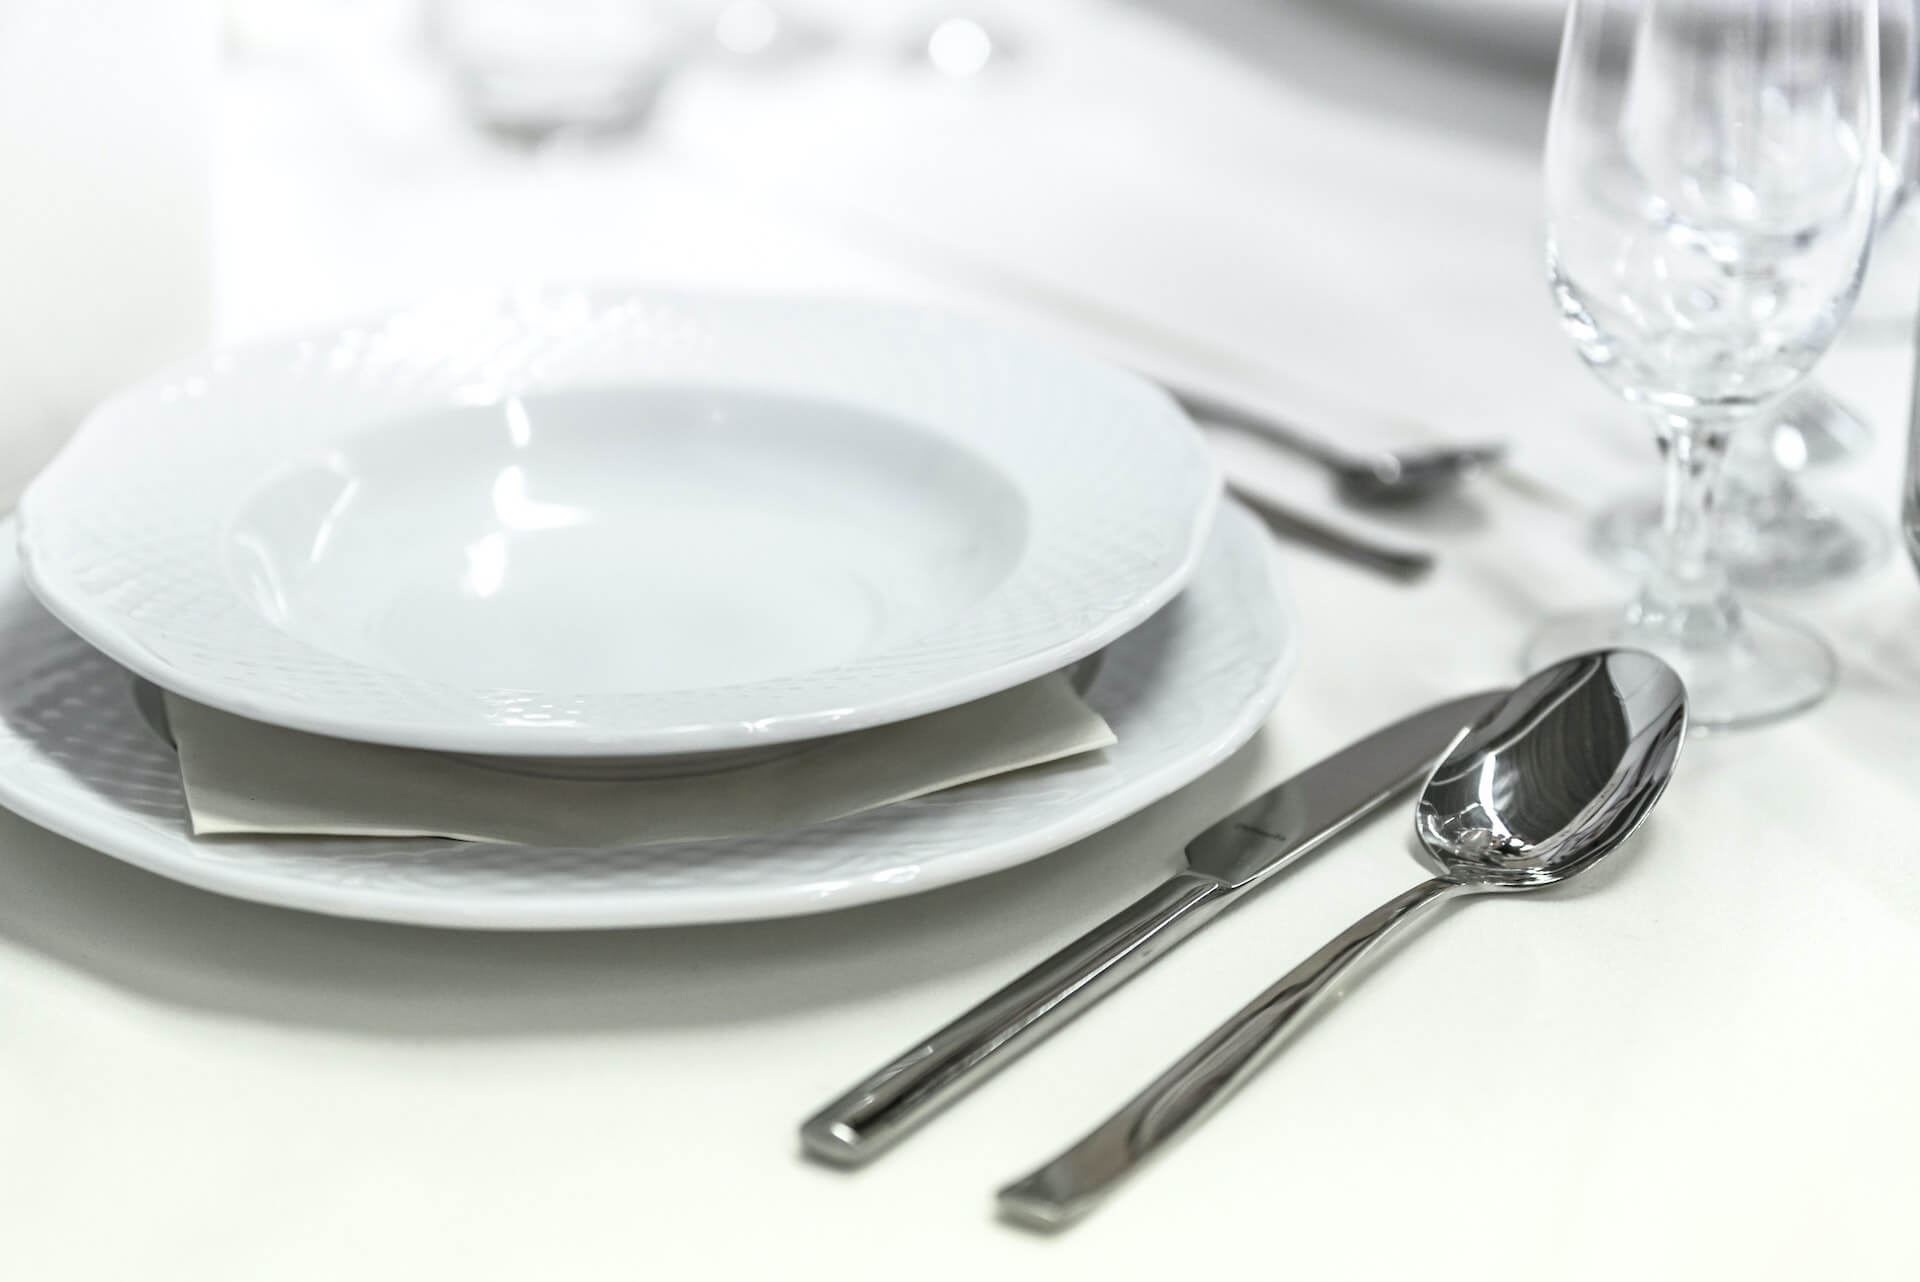 Plates, dishes, cutlery, and glasses in a dinner setting